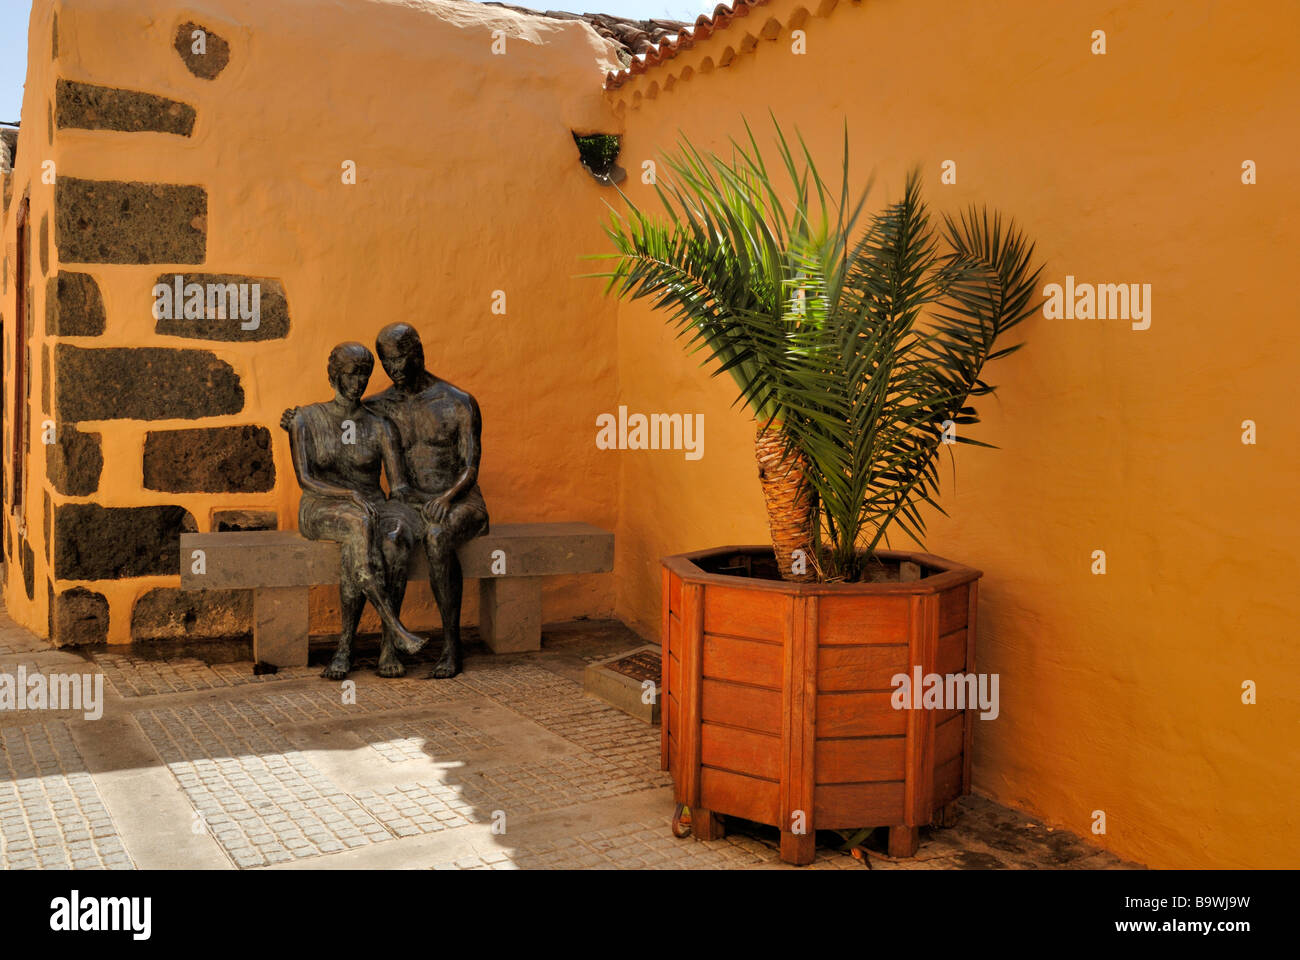 The bronze statue Aspectos del Amor, Aspects of Love. Aguimes, Gran Canaria, Canary Islands, Spain, Europe. Stock Photo